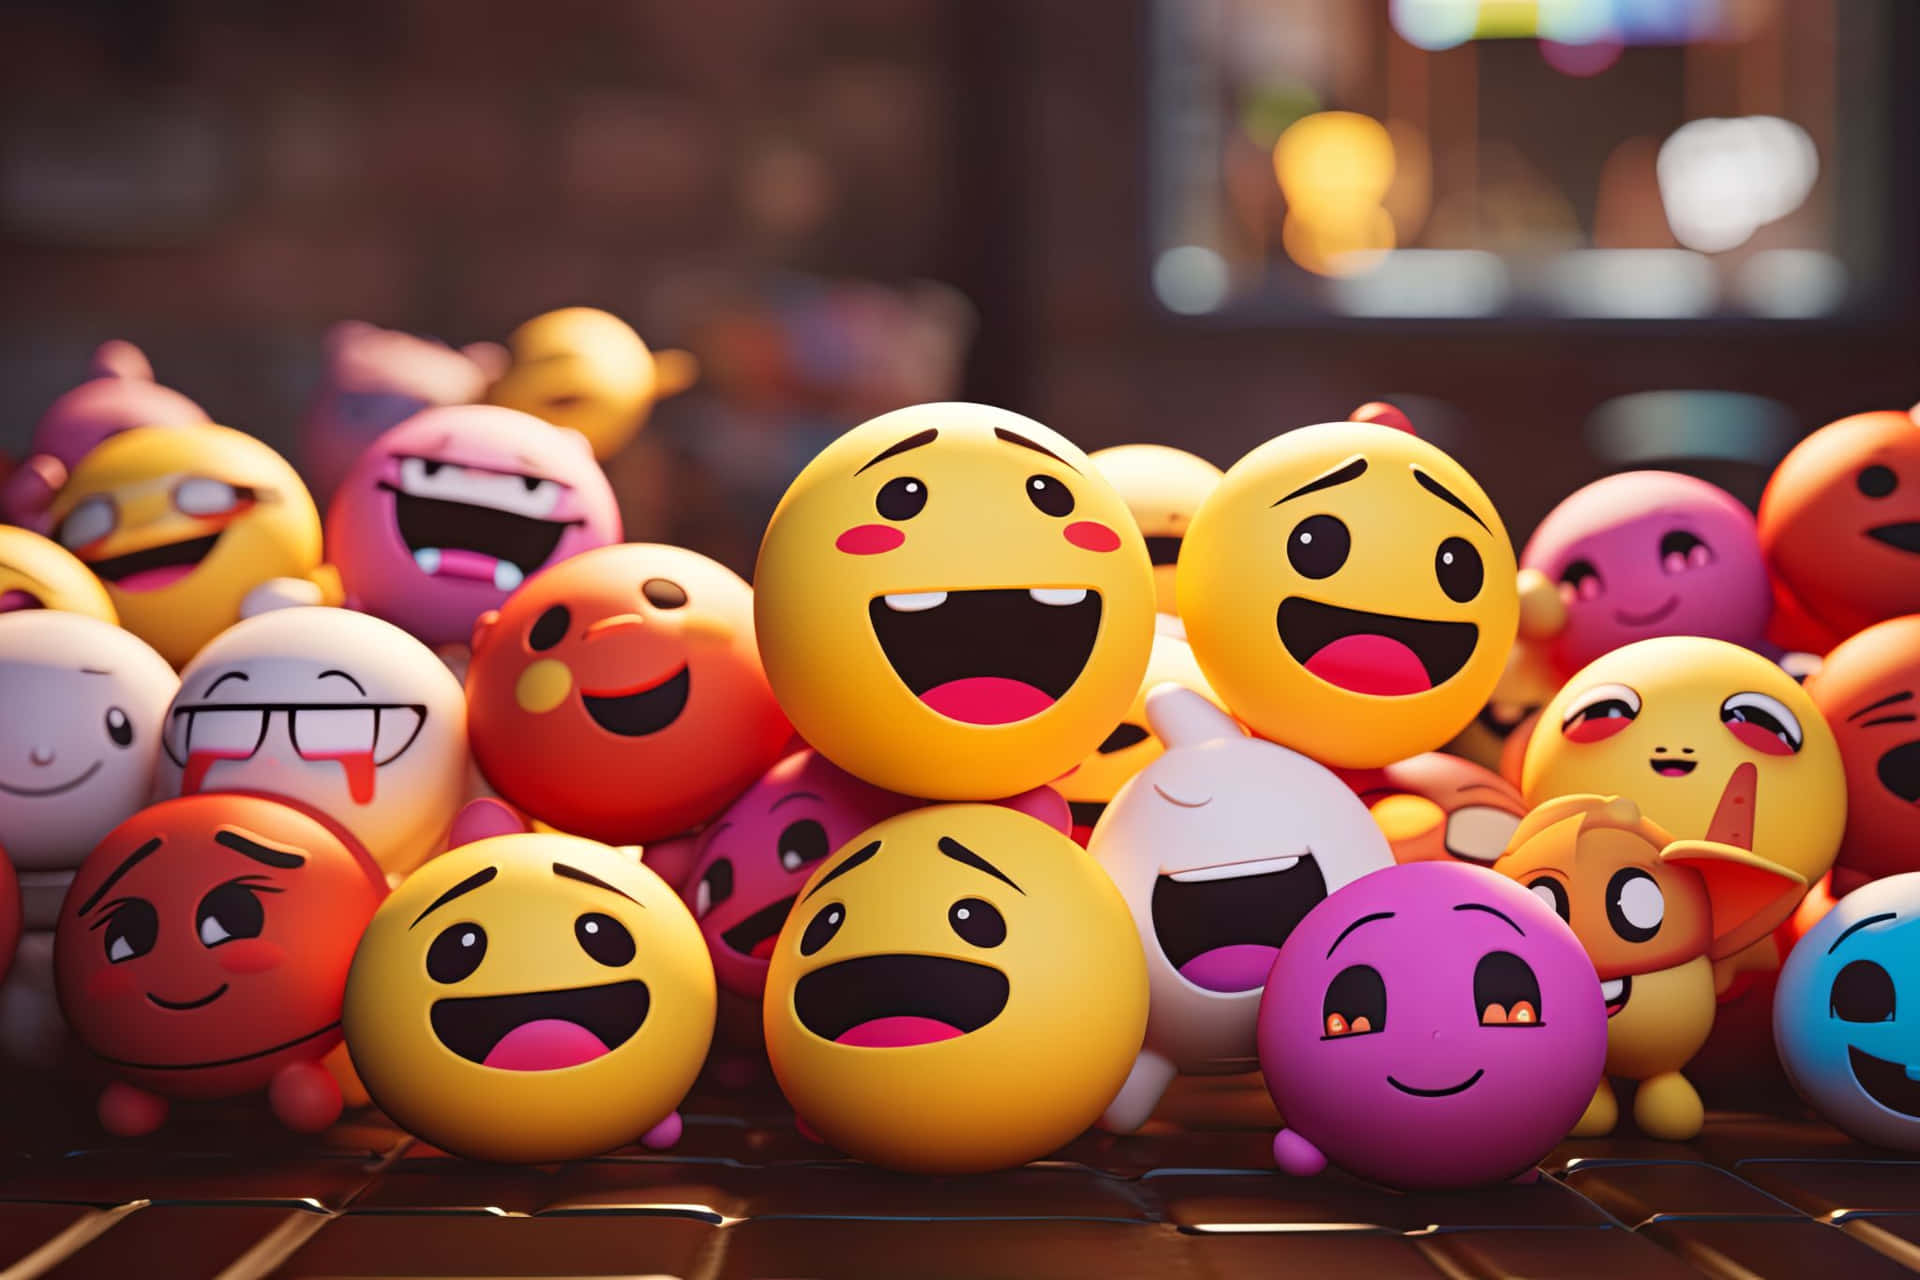 Assorted Emoji Expressions Collection Wallpaper